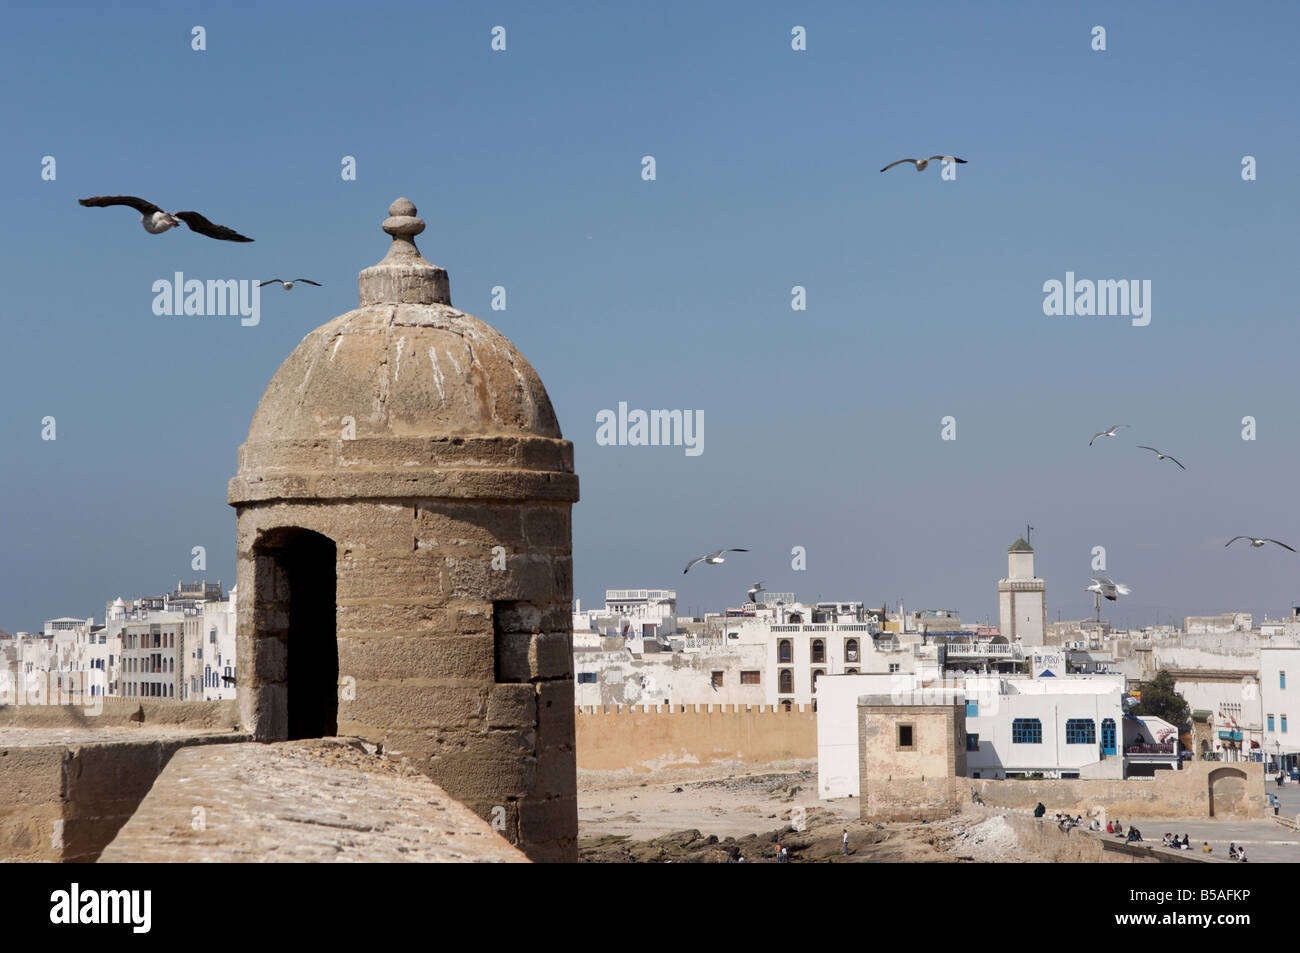 Old waterfront city behind ramparts, Essaouira, historic city of Mogador, Morocco, North Africa, Africa Stock Photo